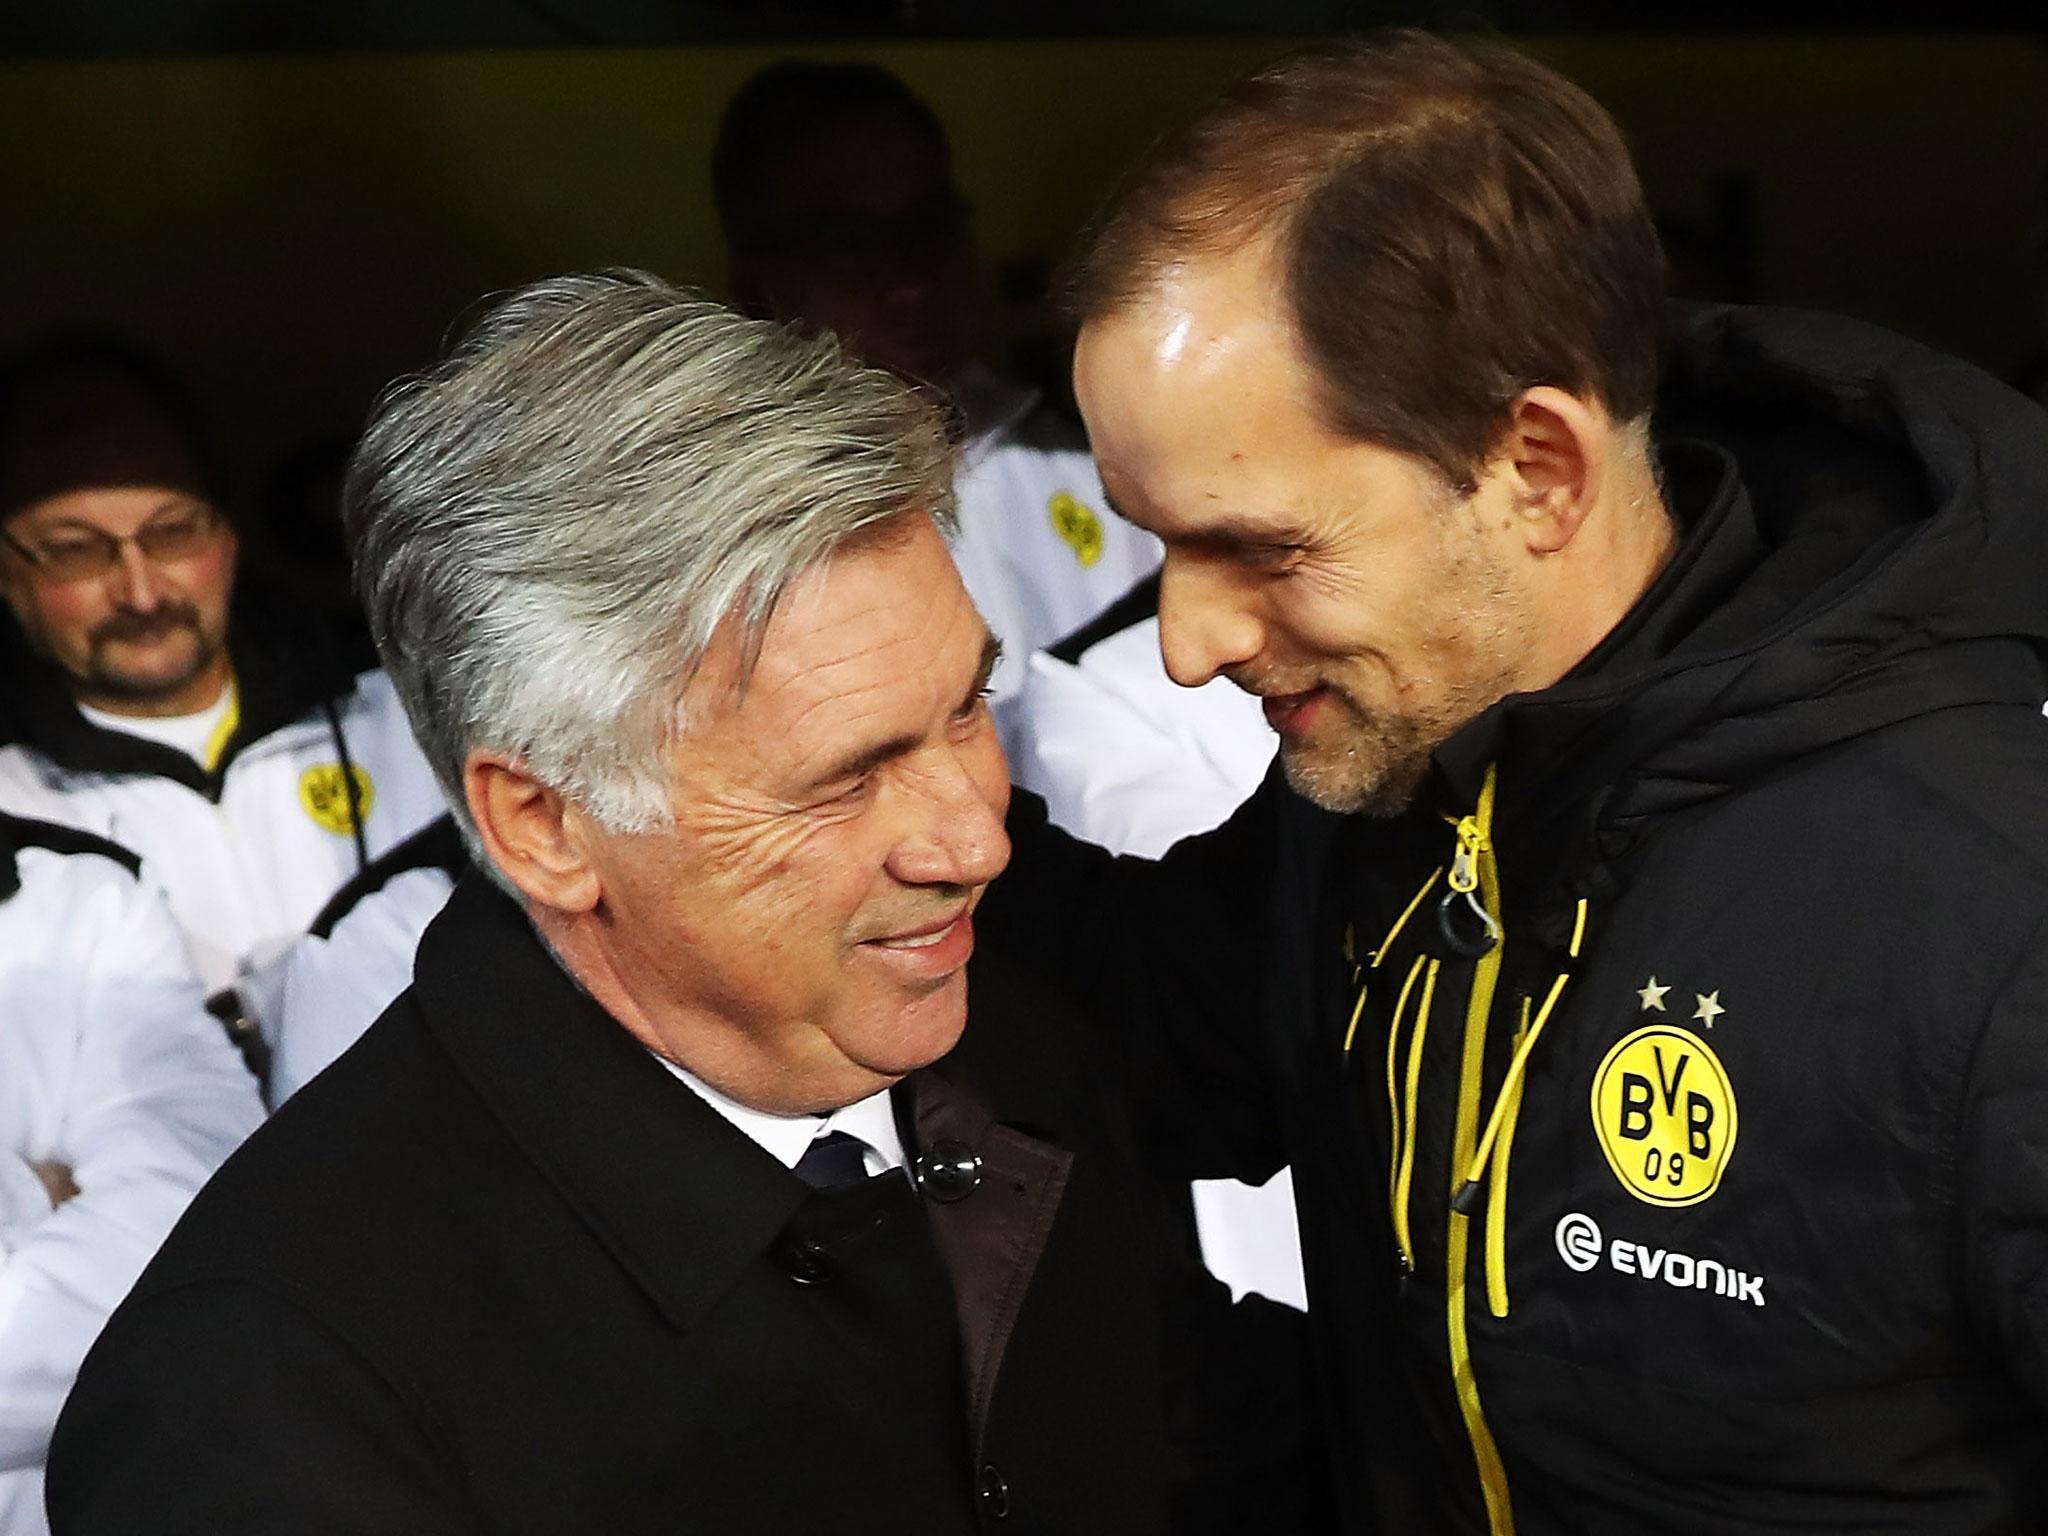 Both Ancelotti and Tuchel face an uphill battle to make it through to the Champions League's last four